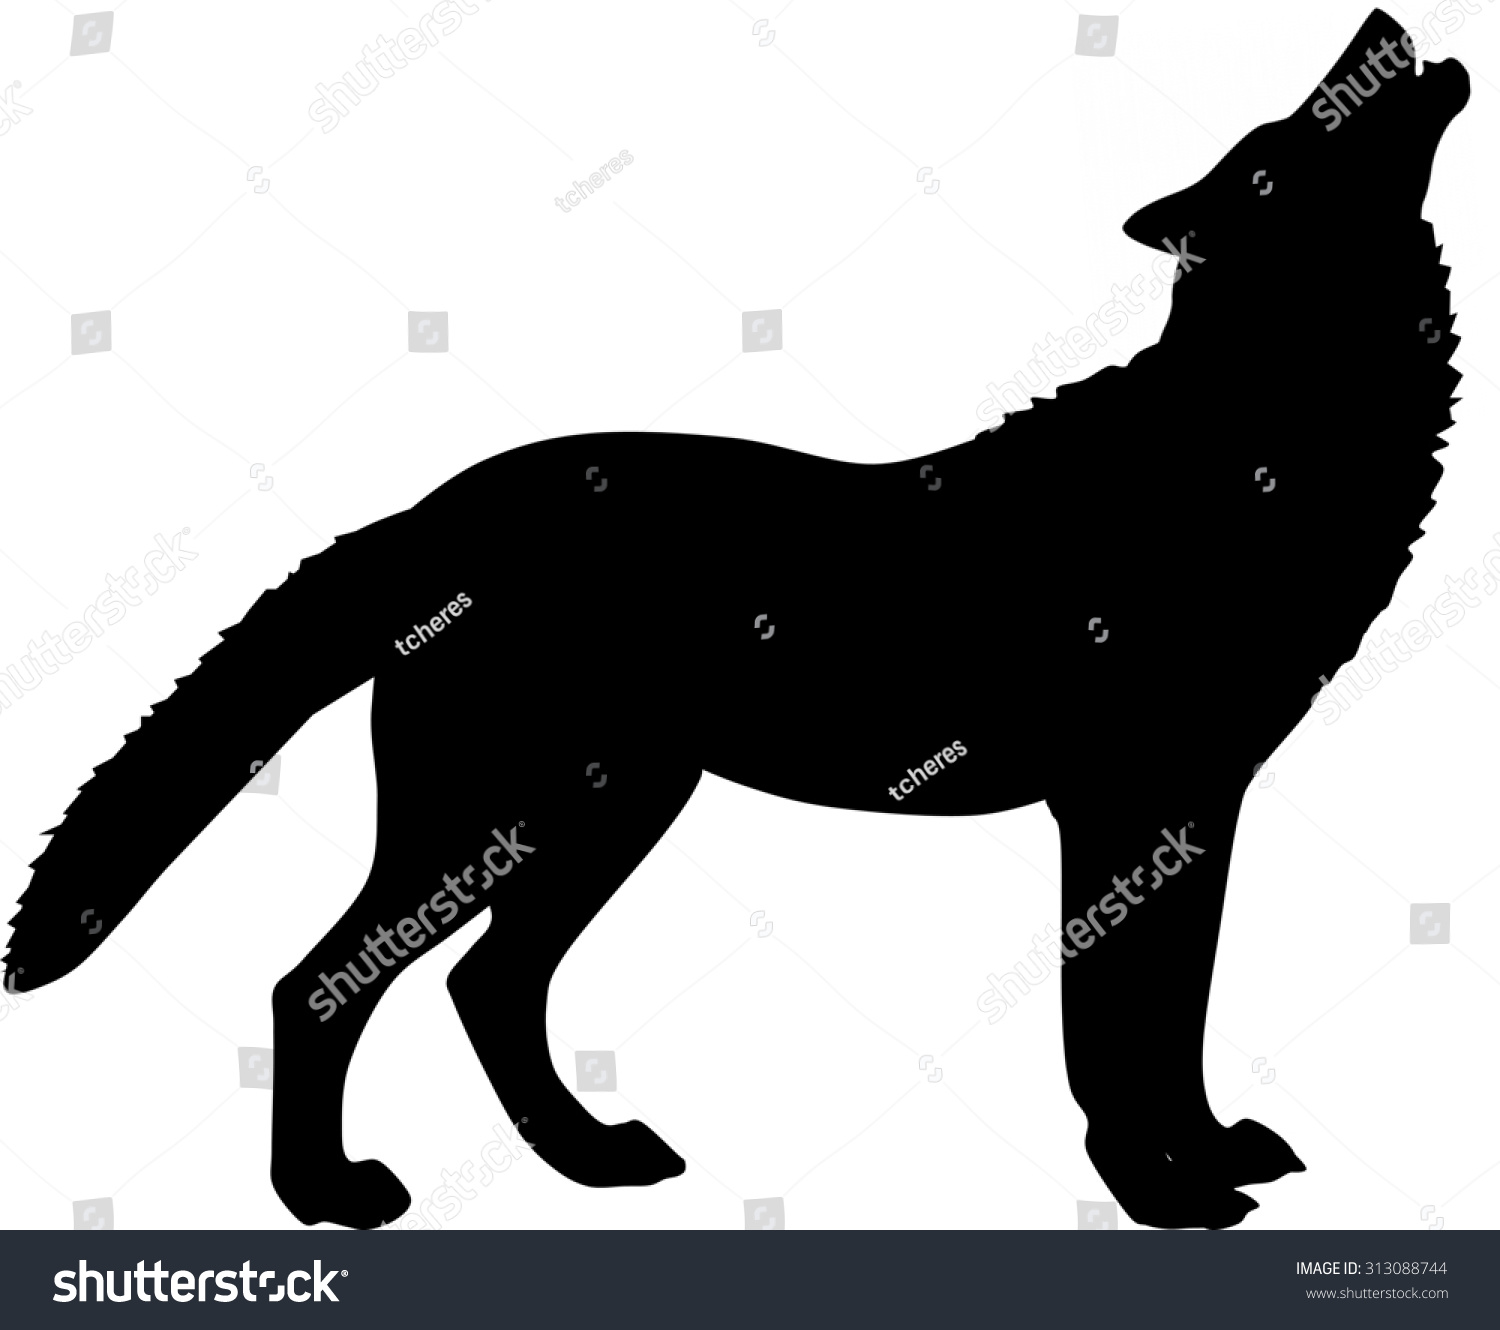 Black Silhouette Of A Howling Wolf Stock Photo 313088744 : Shutterstock